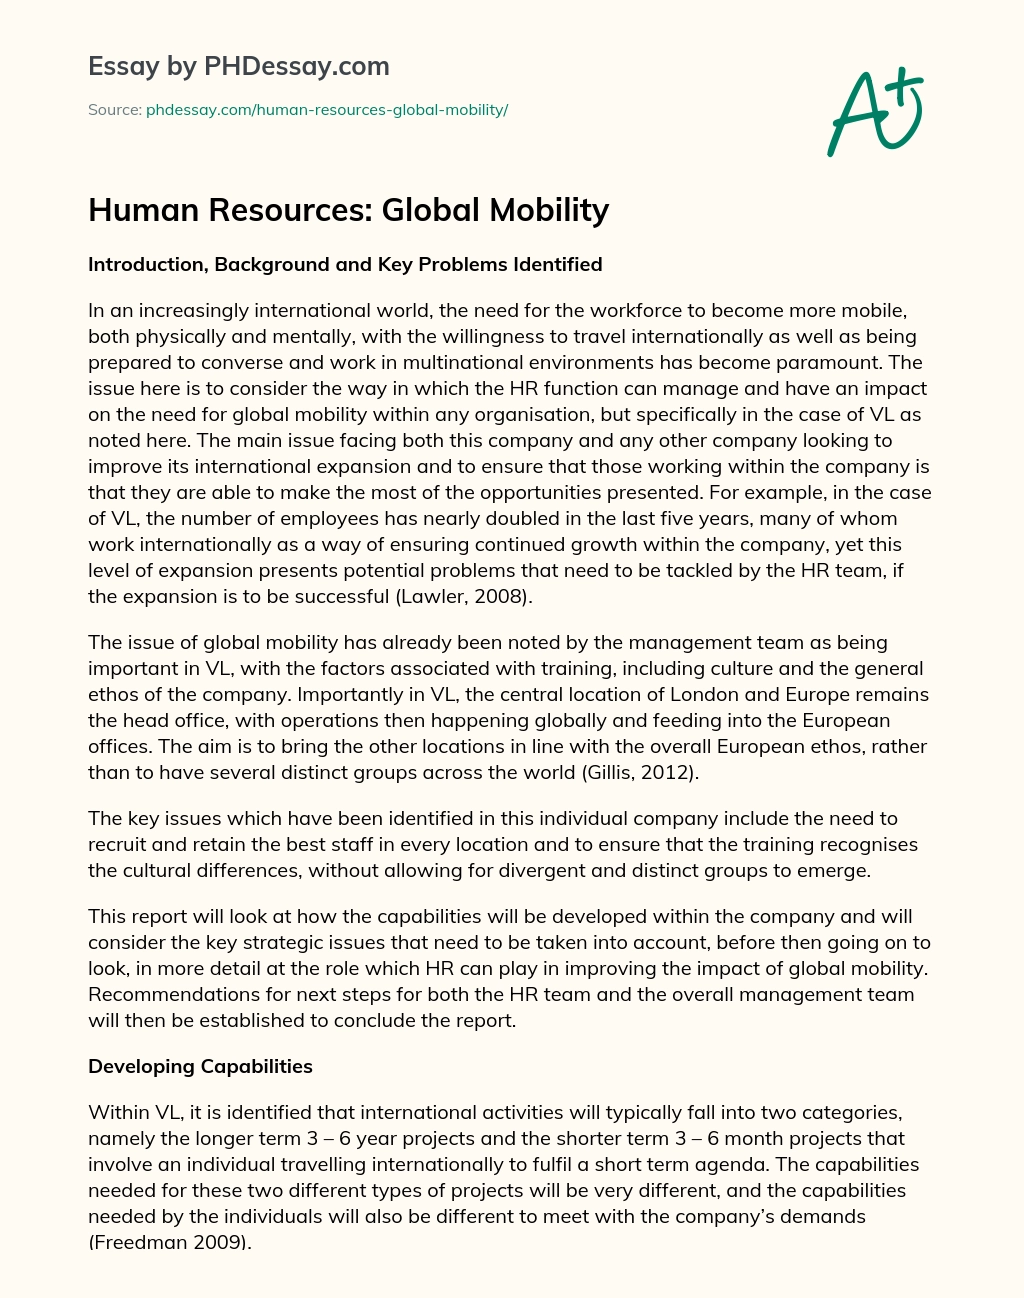 Human Resources: Global Mobility essay